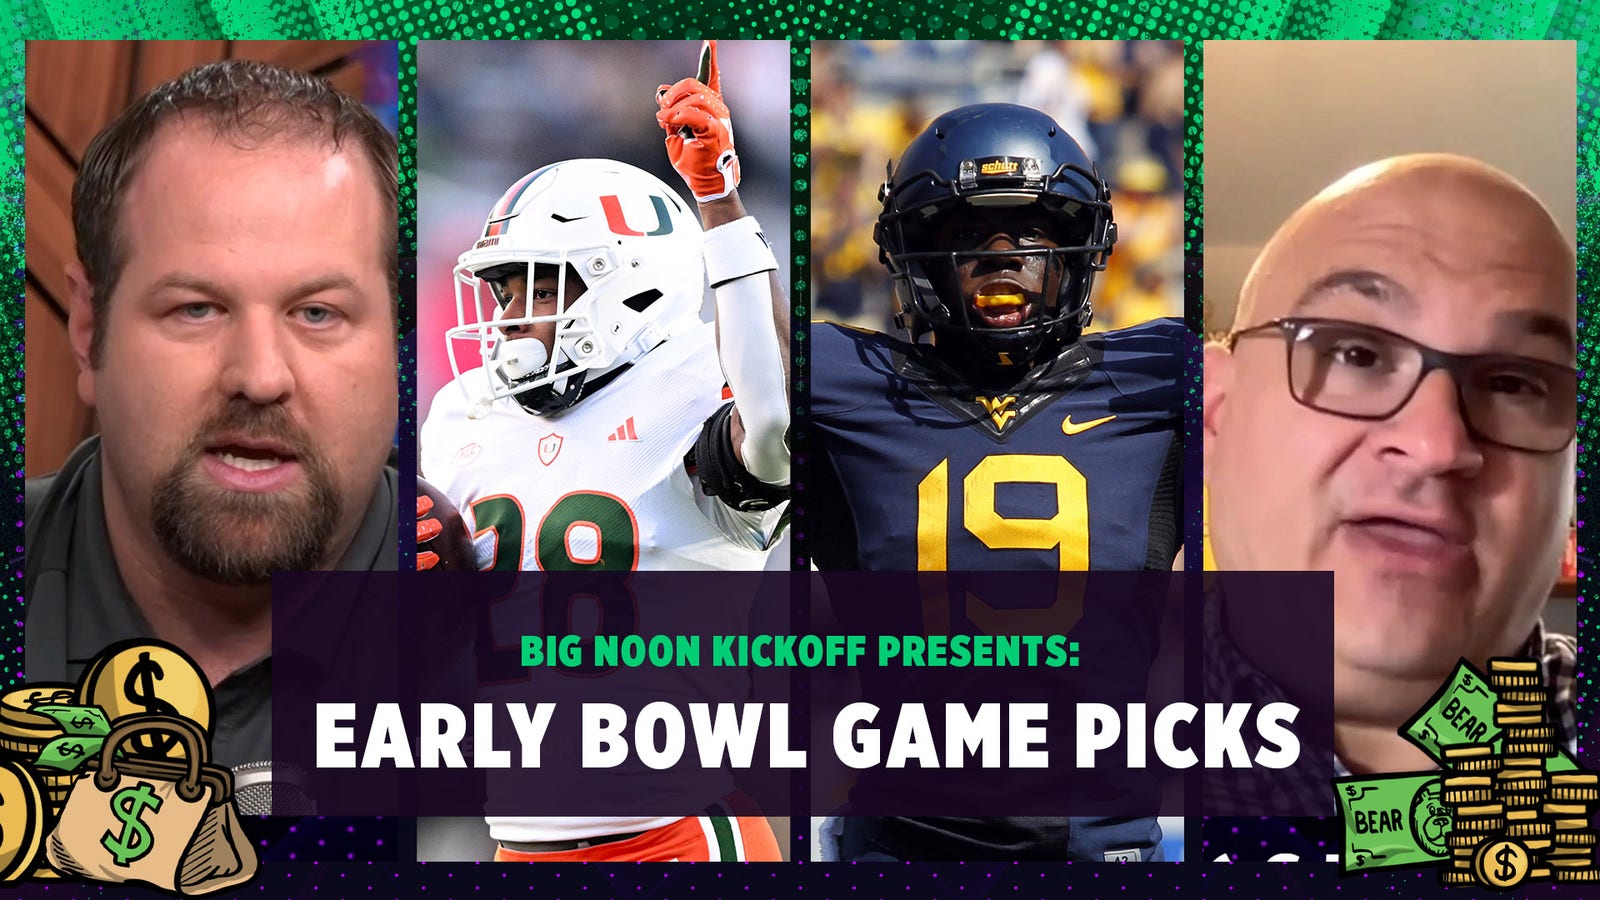 Miami vs. Rutgers, UNC vs. West Virginia early bowl game previews and picks 